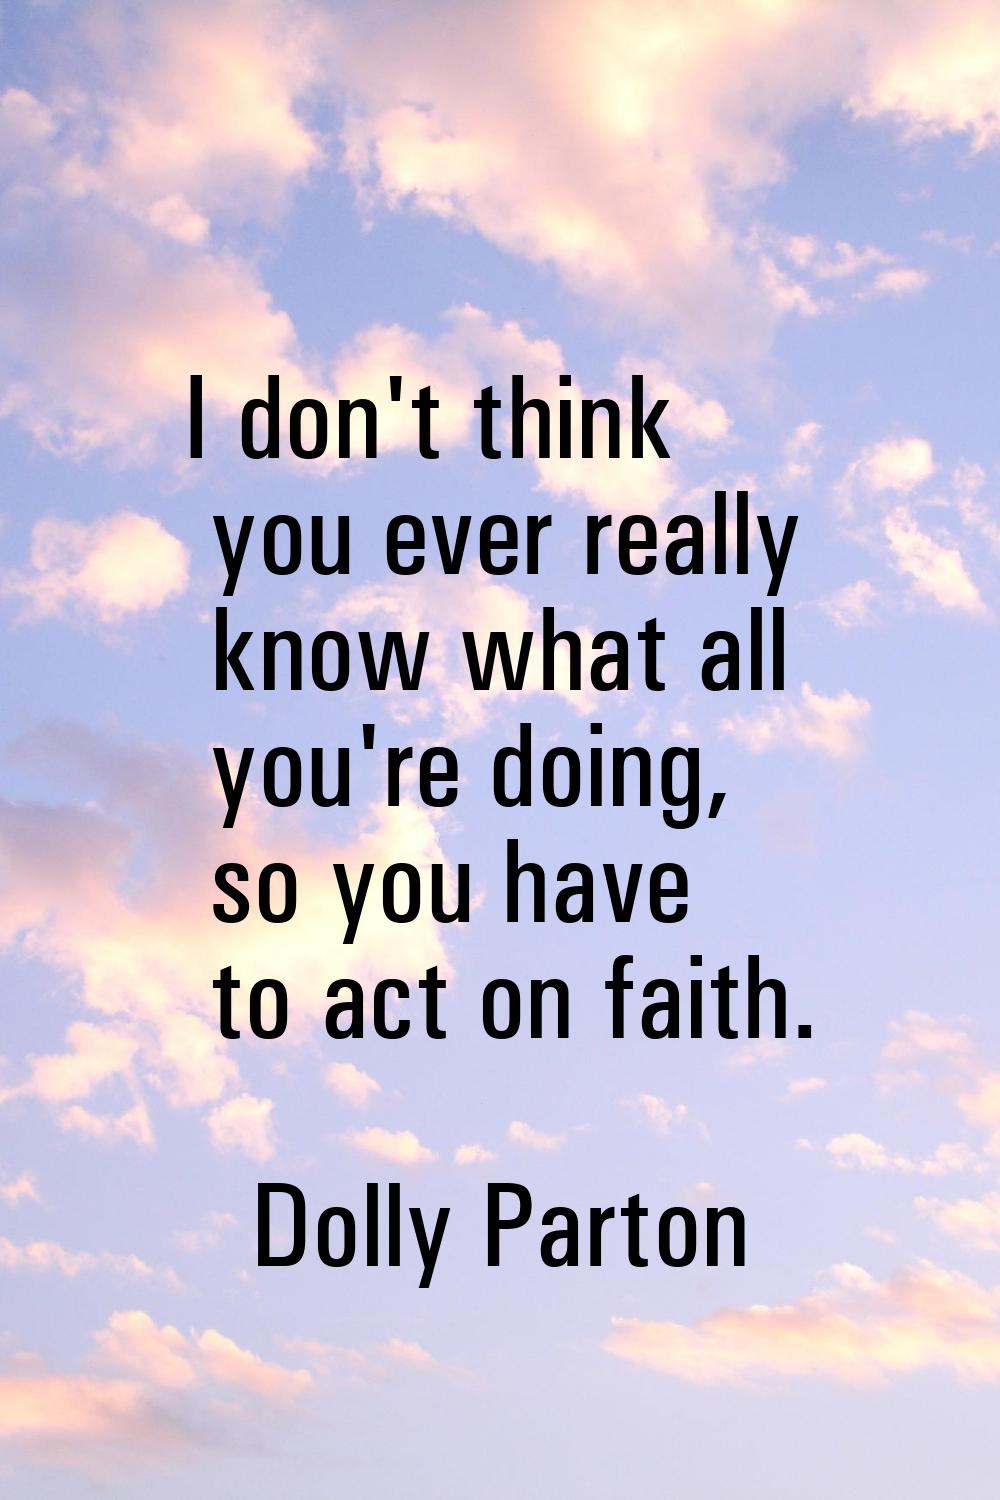 I don't think you ever really know what all you're doing, so you have to act on faith.